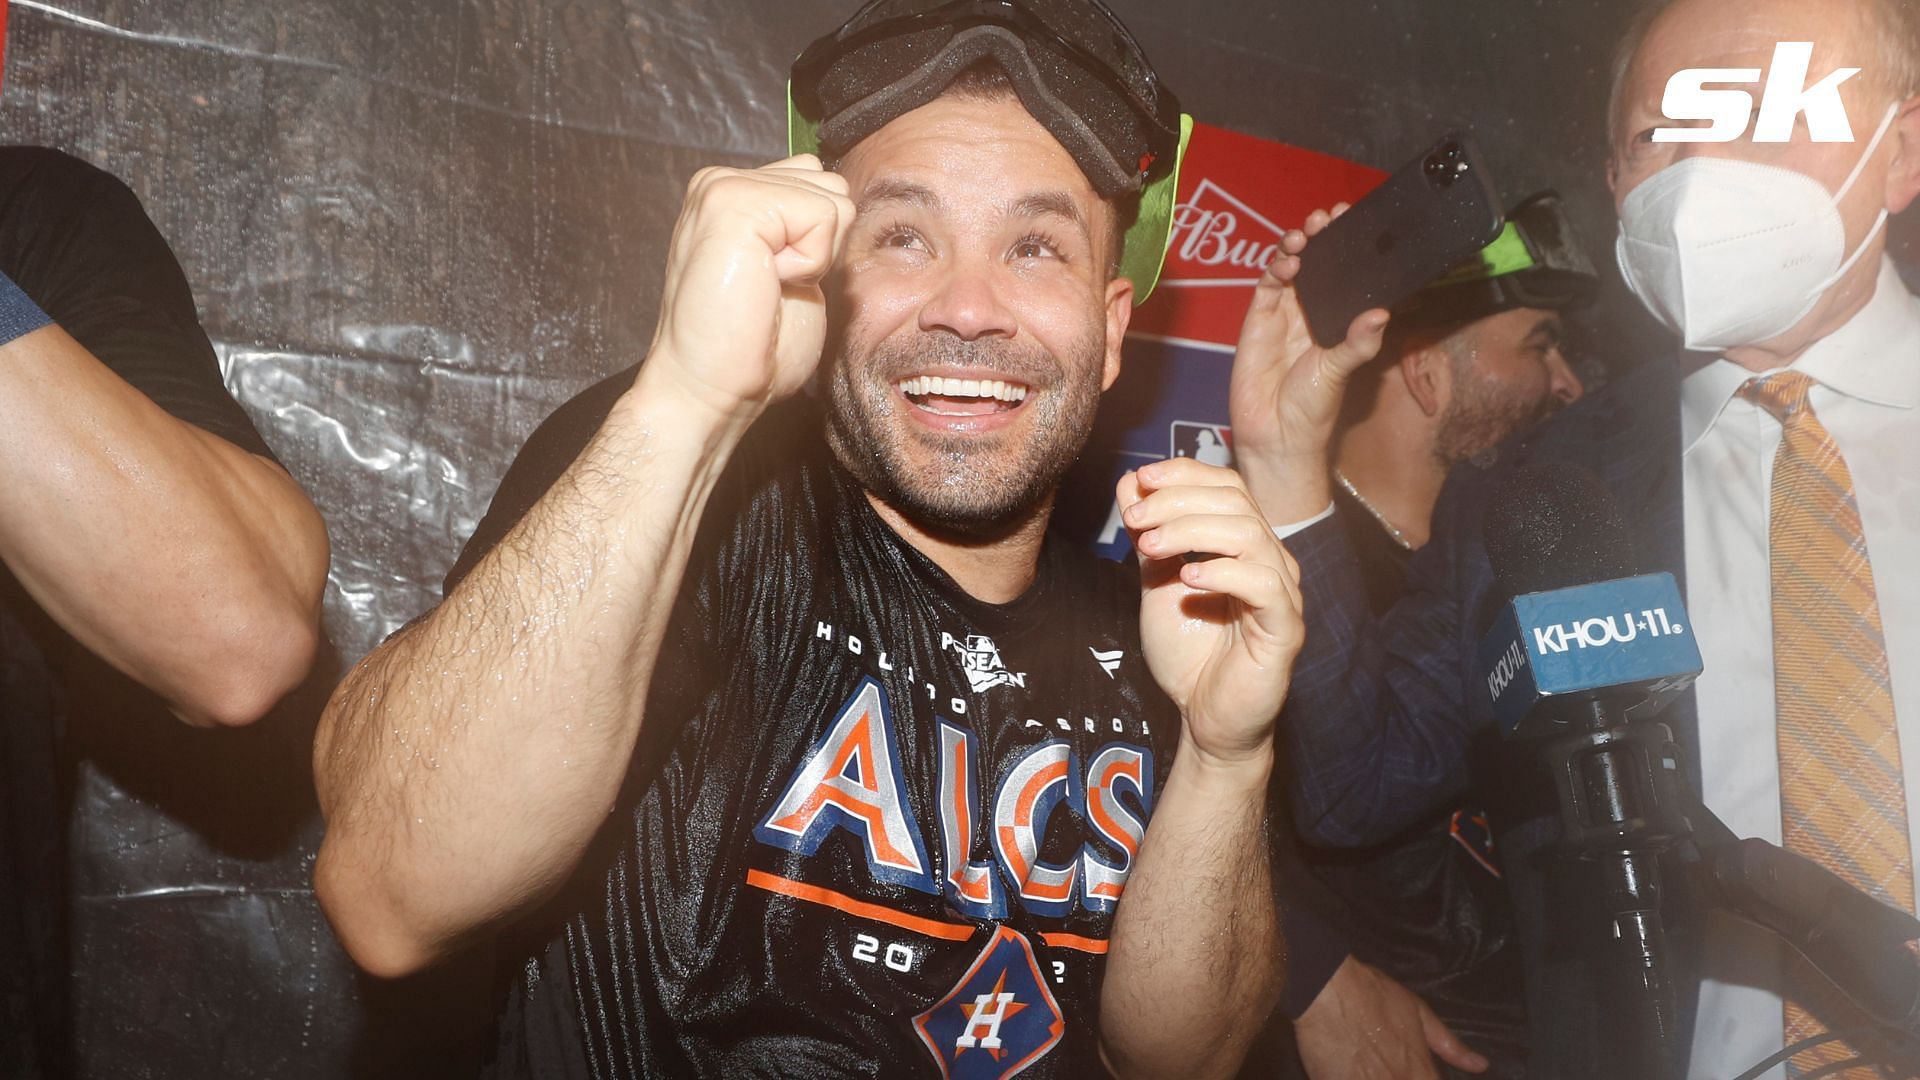 Houston Astros star Jose Altuve was trolled at a recent LA Kings game on the Look-alike cam